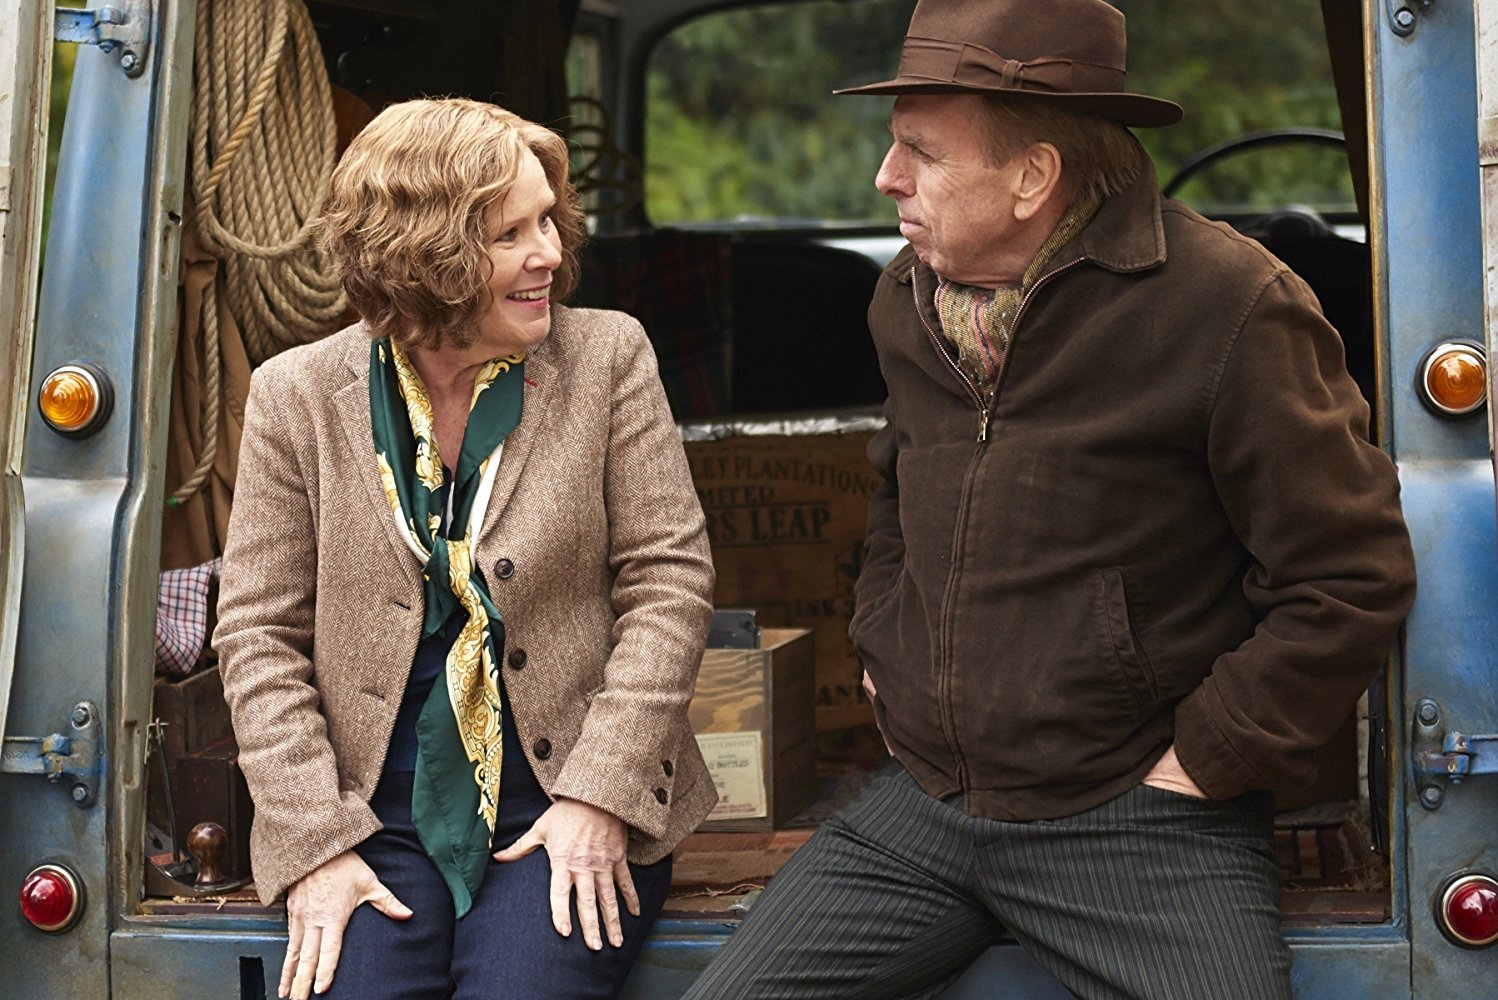 Finding Your Feet review